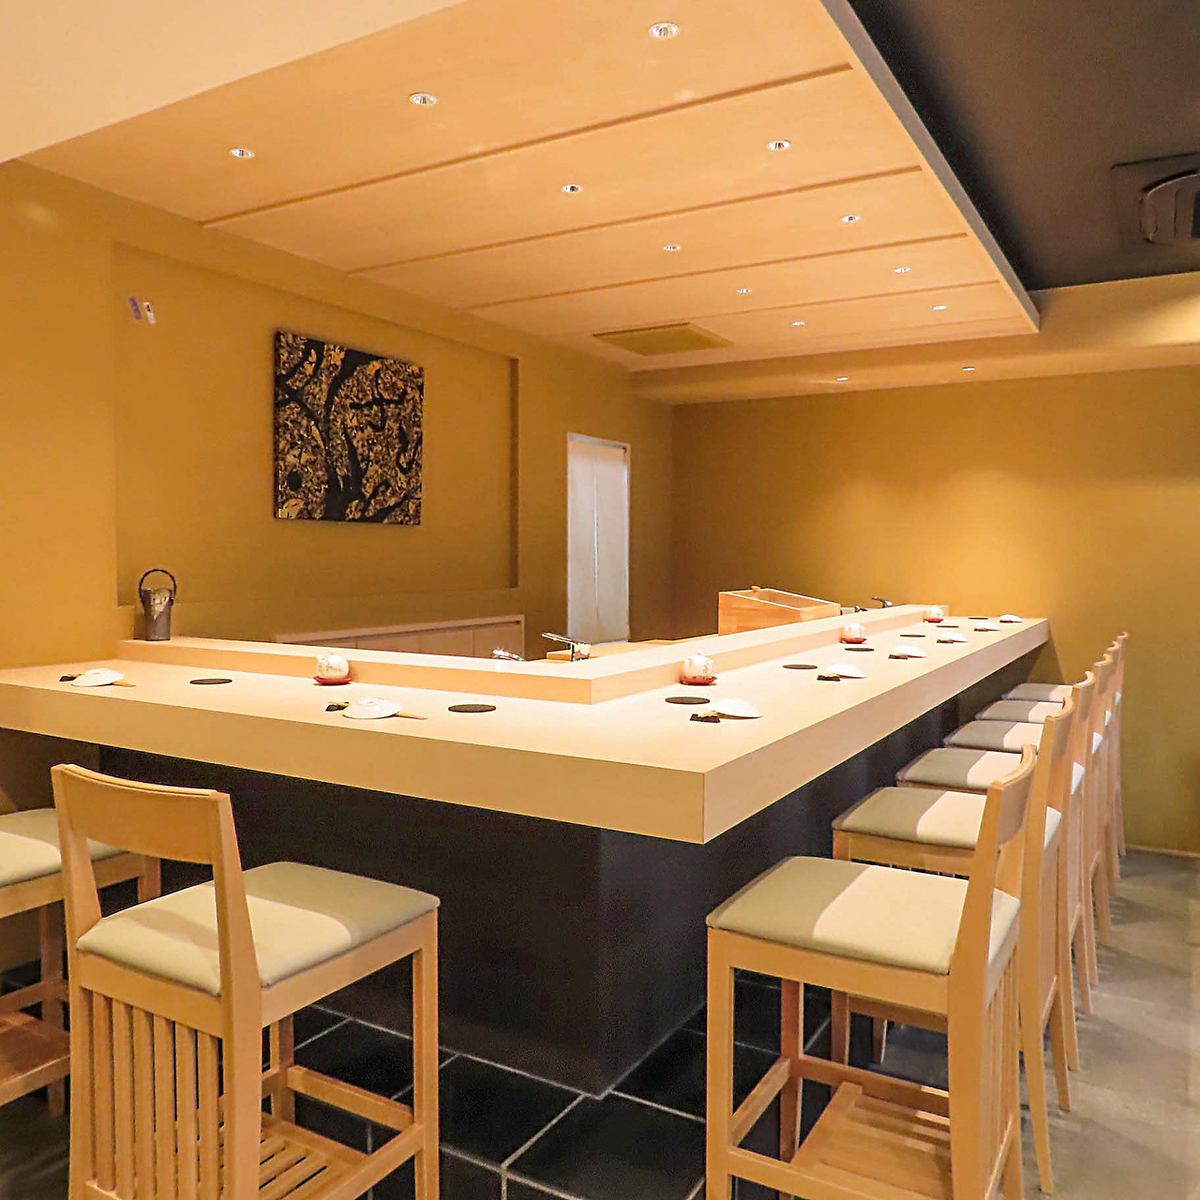 Enjoy sushi and kaiseki cuisine to your heart's content in a wood-based restaurant.